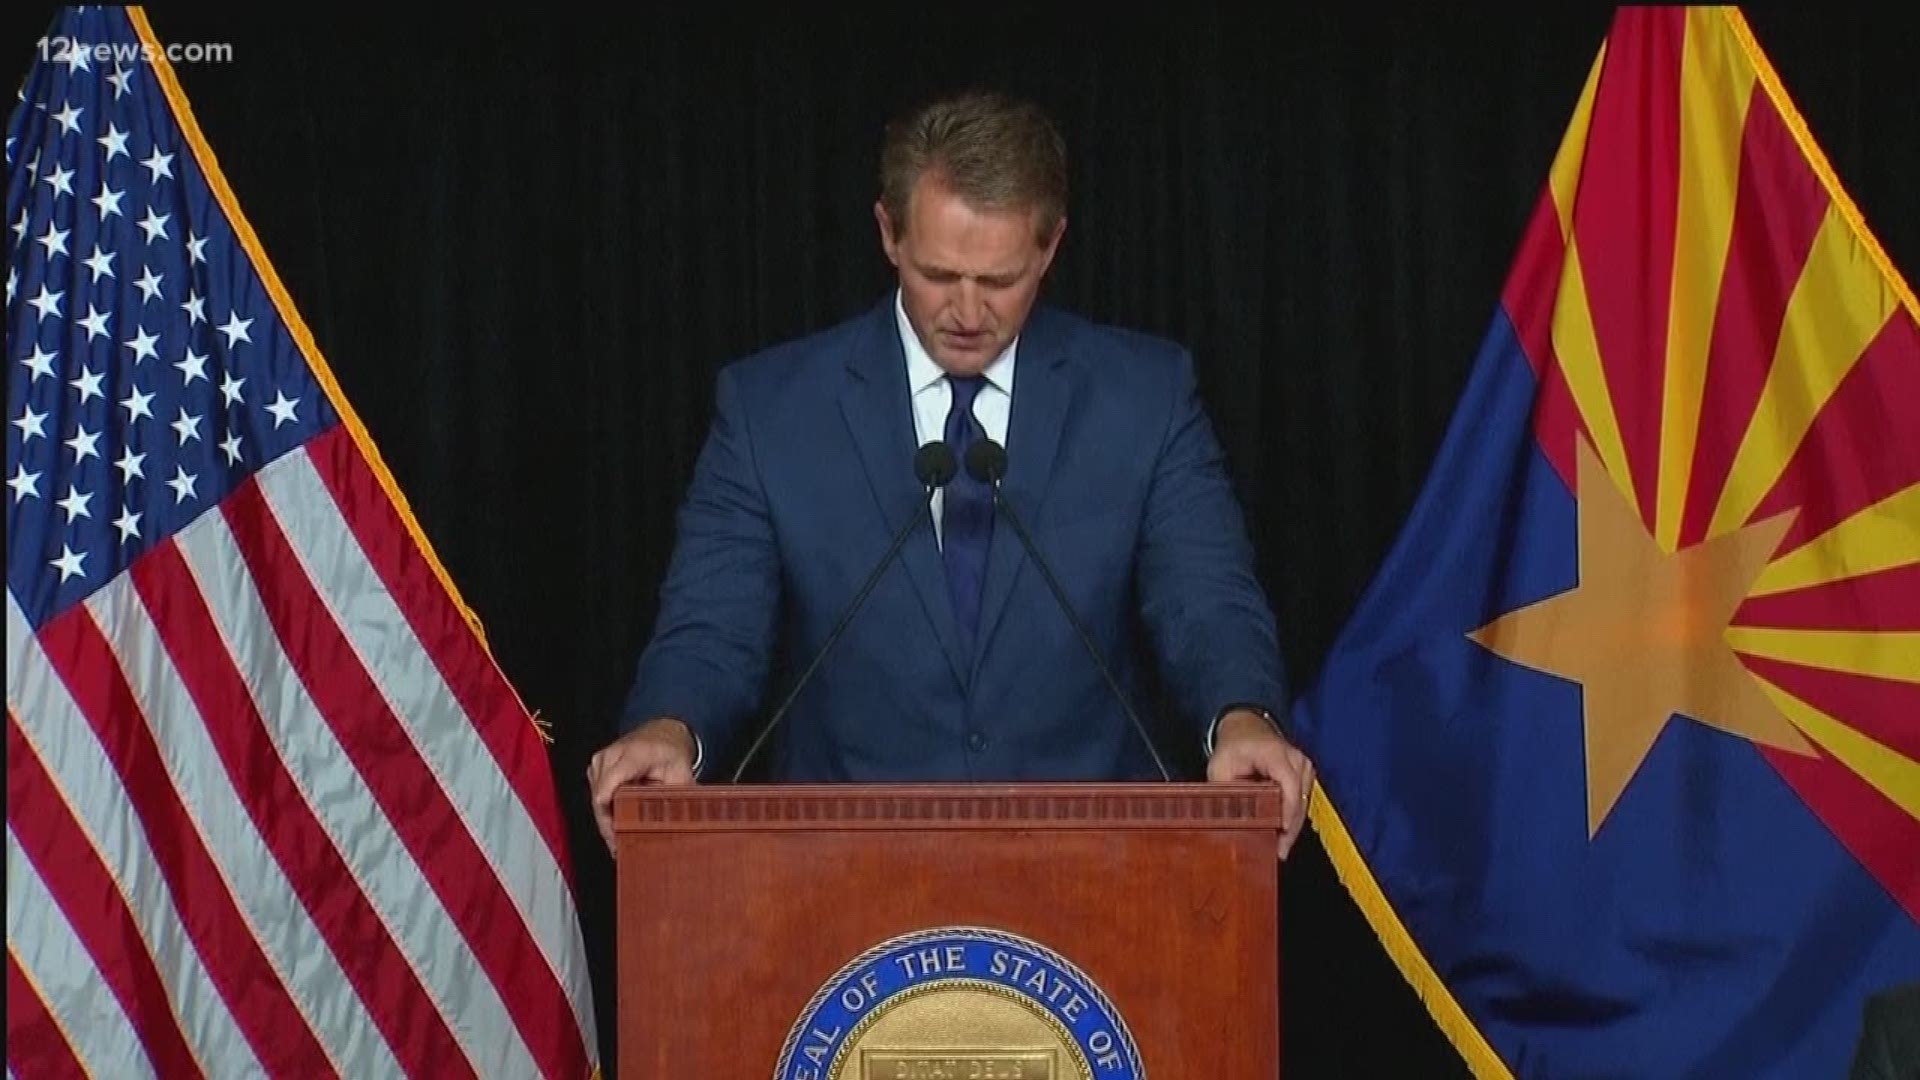 Senator Jeff Flake offers benediction on gratefulness for the life and service of John McCain. 